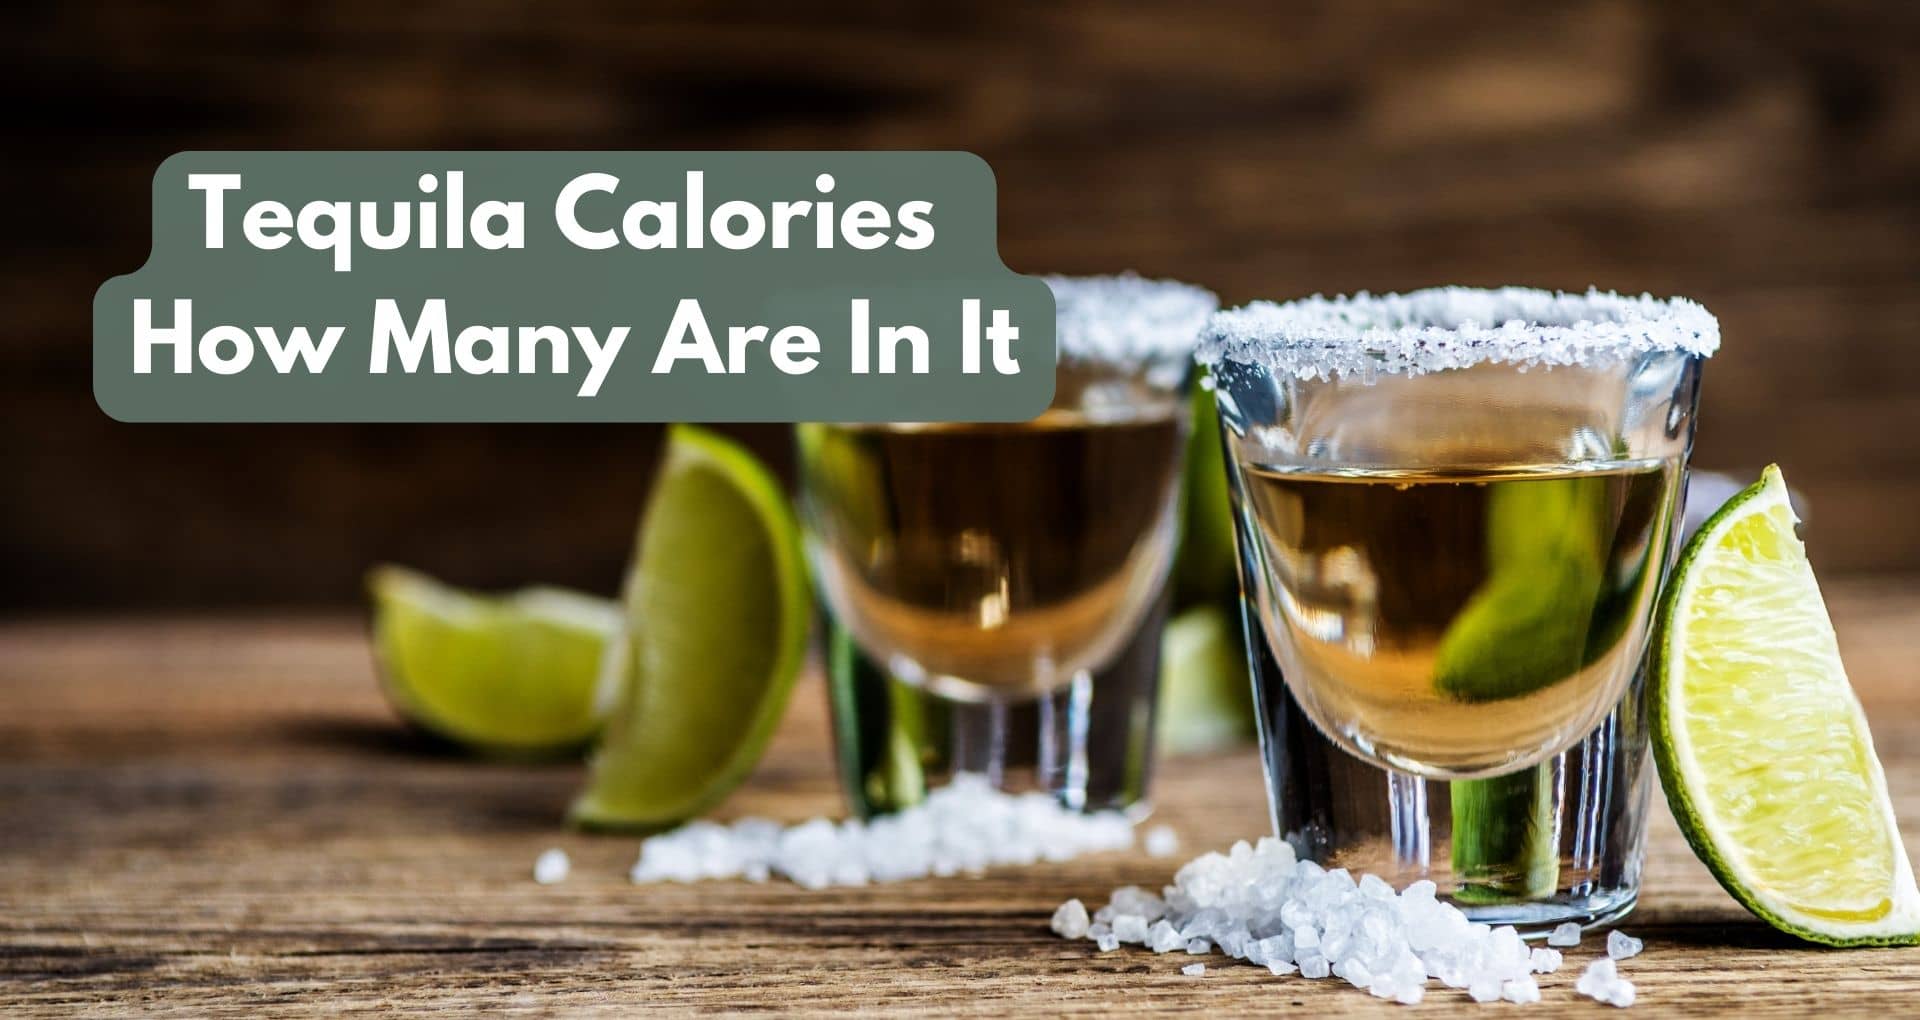 Tequila Calories How Many Are In It?